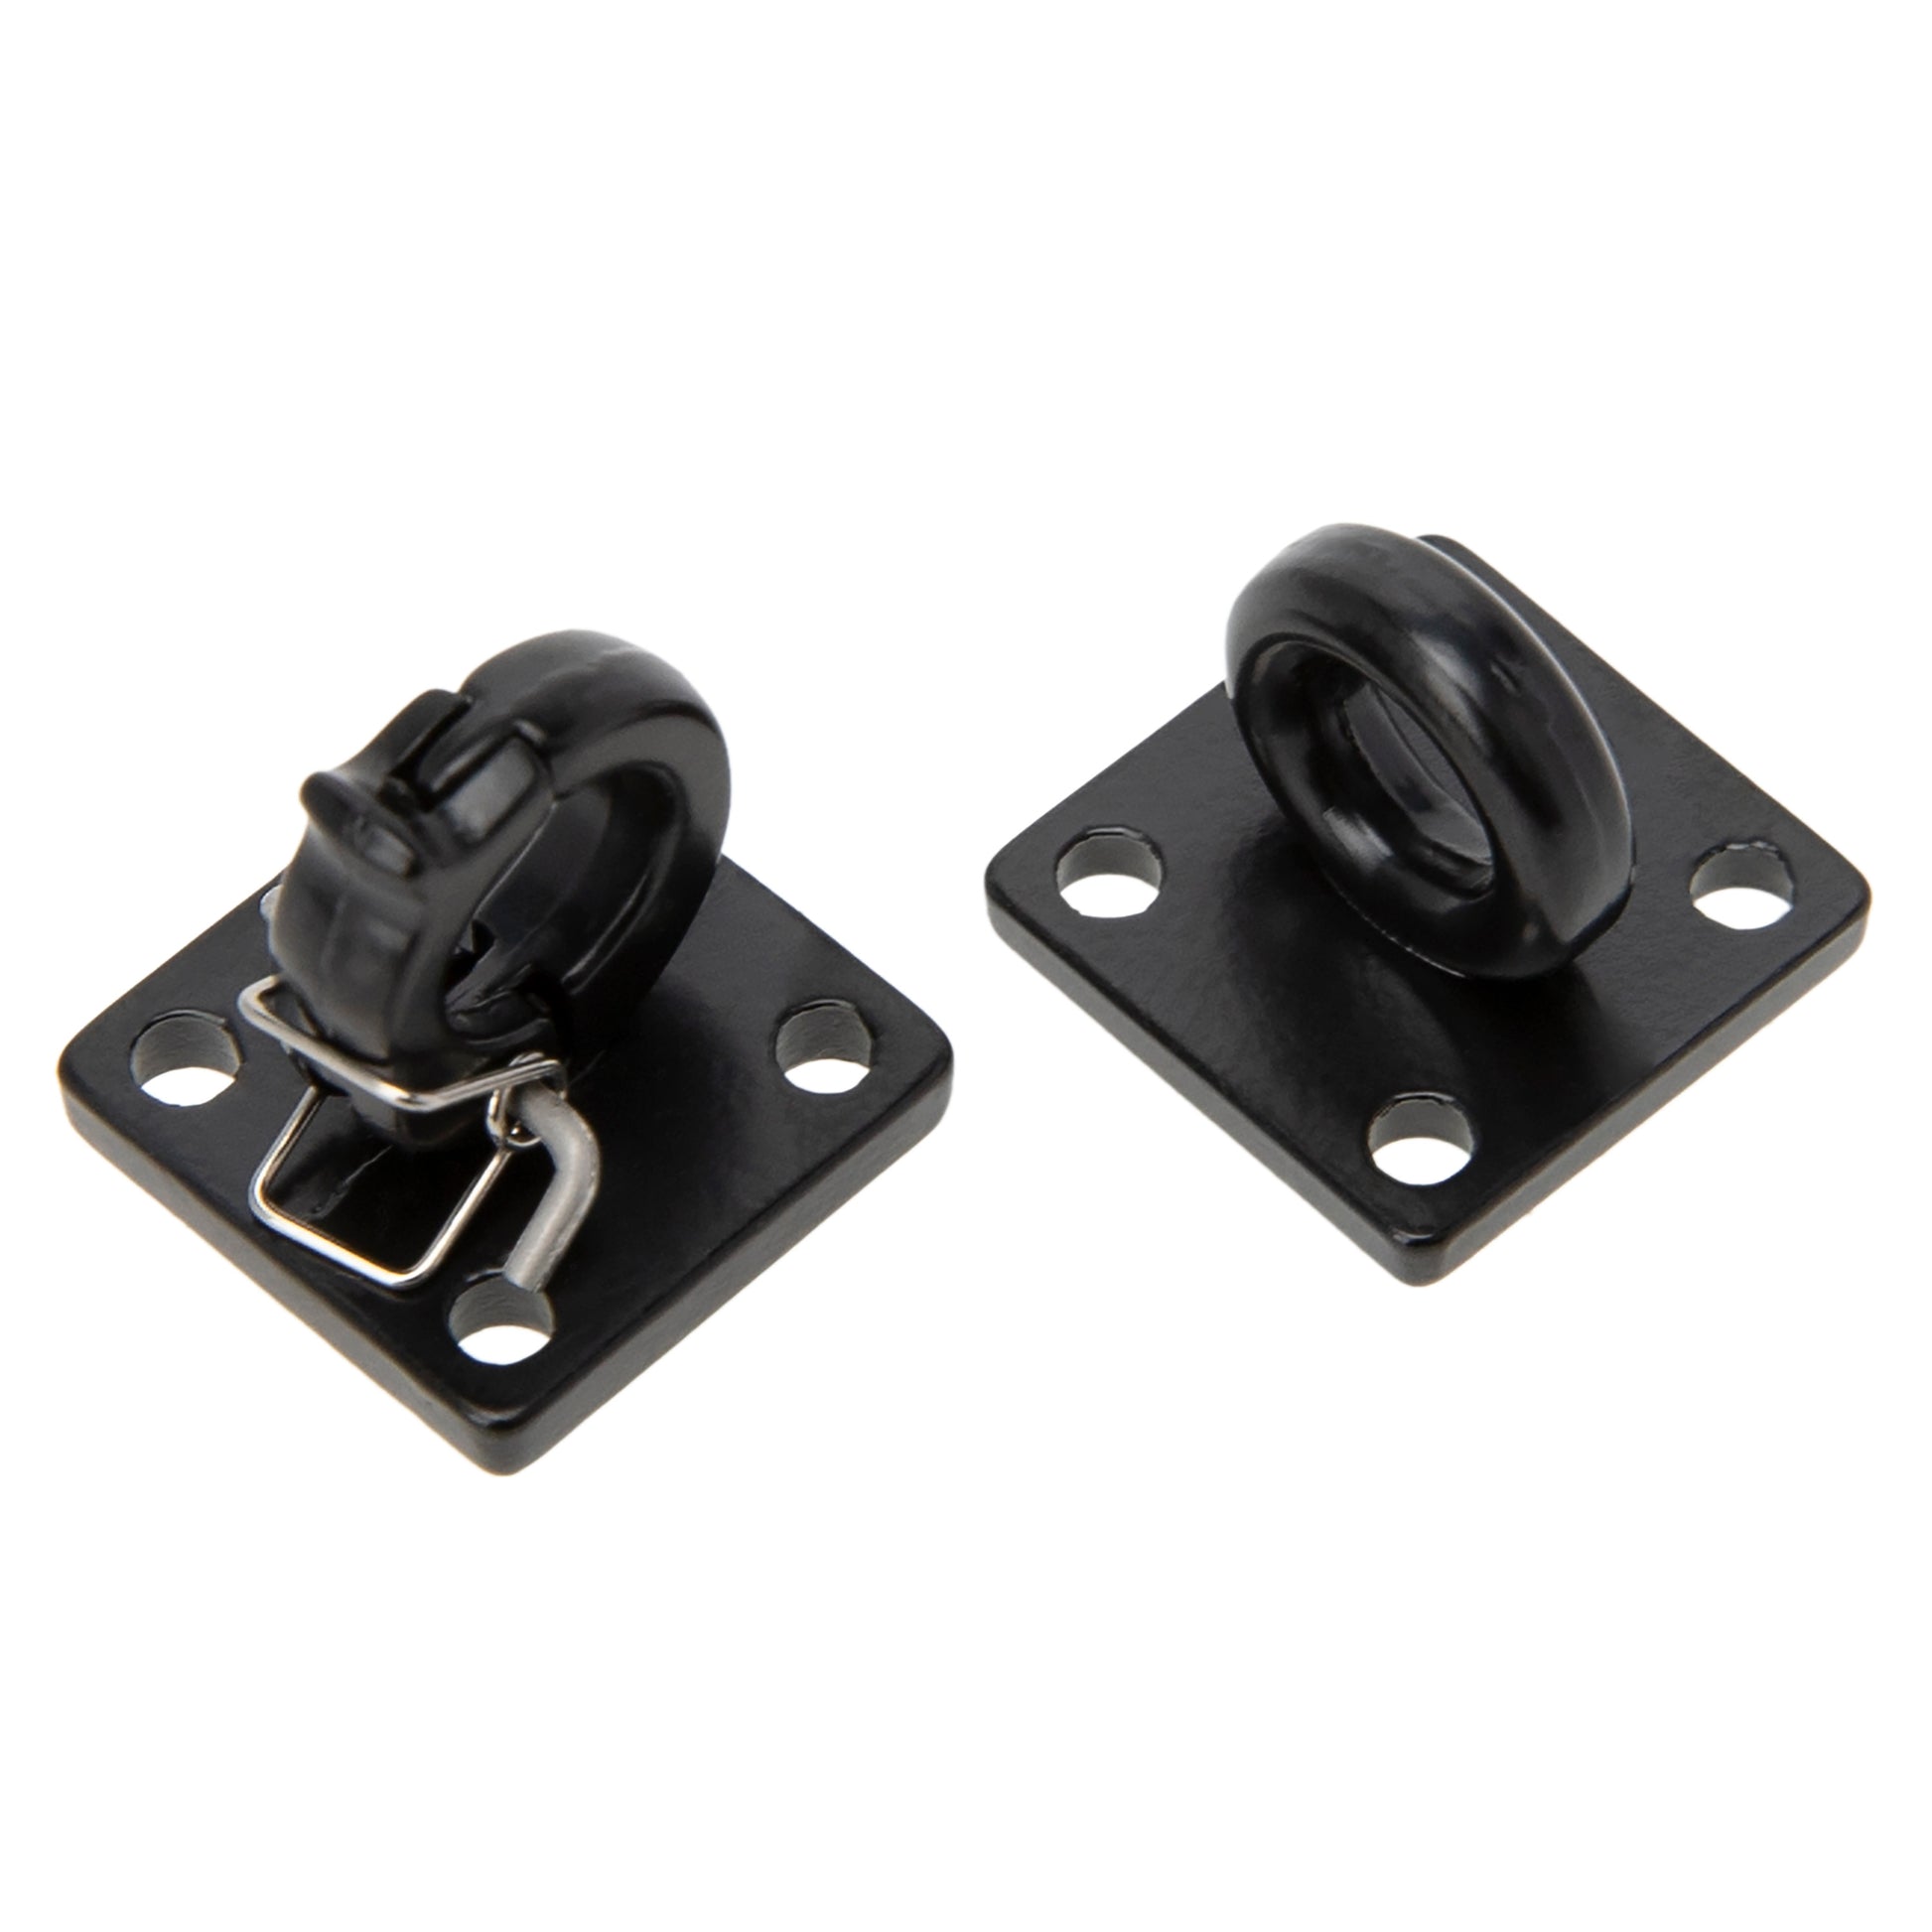 Black Metal Rescue Buckle Simulation Tow Hook for 1/10 RC Car